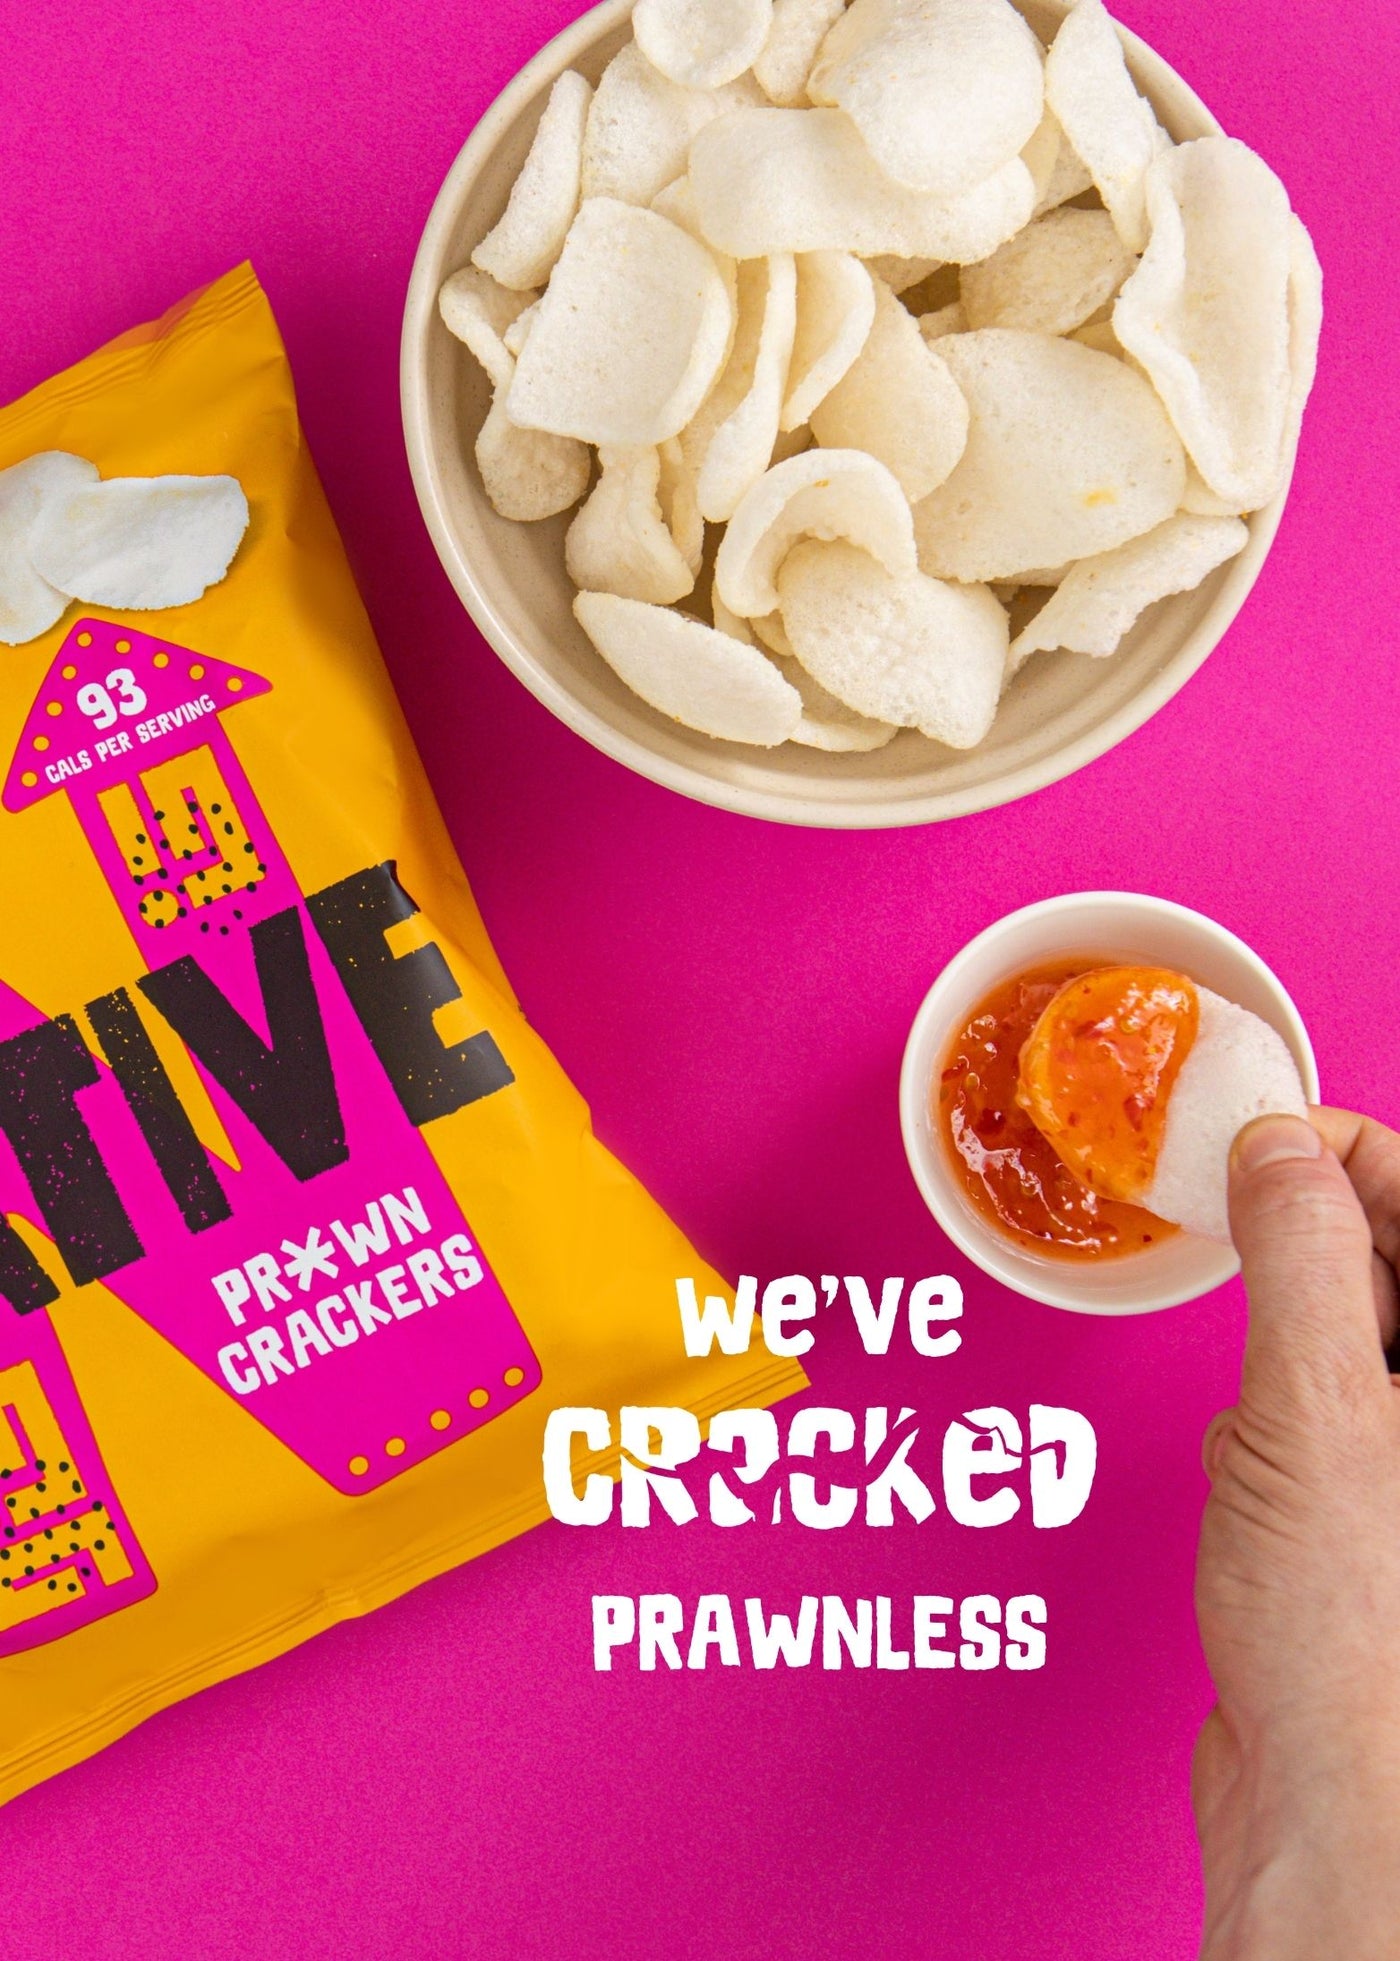 Vegan prawn crackers in original prawn flavour and sweet chilli. A light and crunchy snack for dinner or lunch. Vegan, vegetarian, gluten free, under 99 calories, less fat than crisps and natural. Enjoy with a meal, dip or takeaway. Free delivery over £20